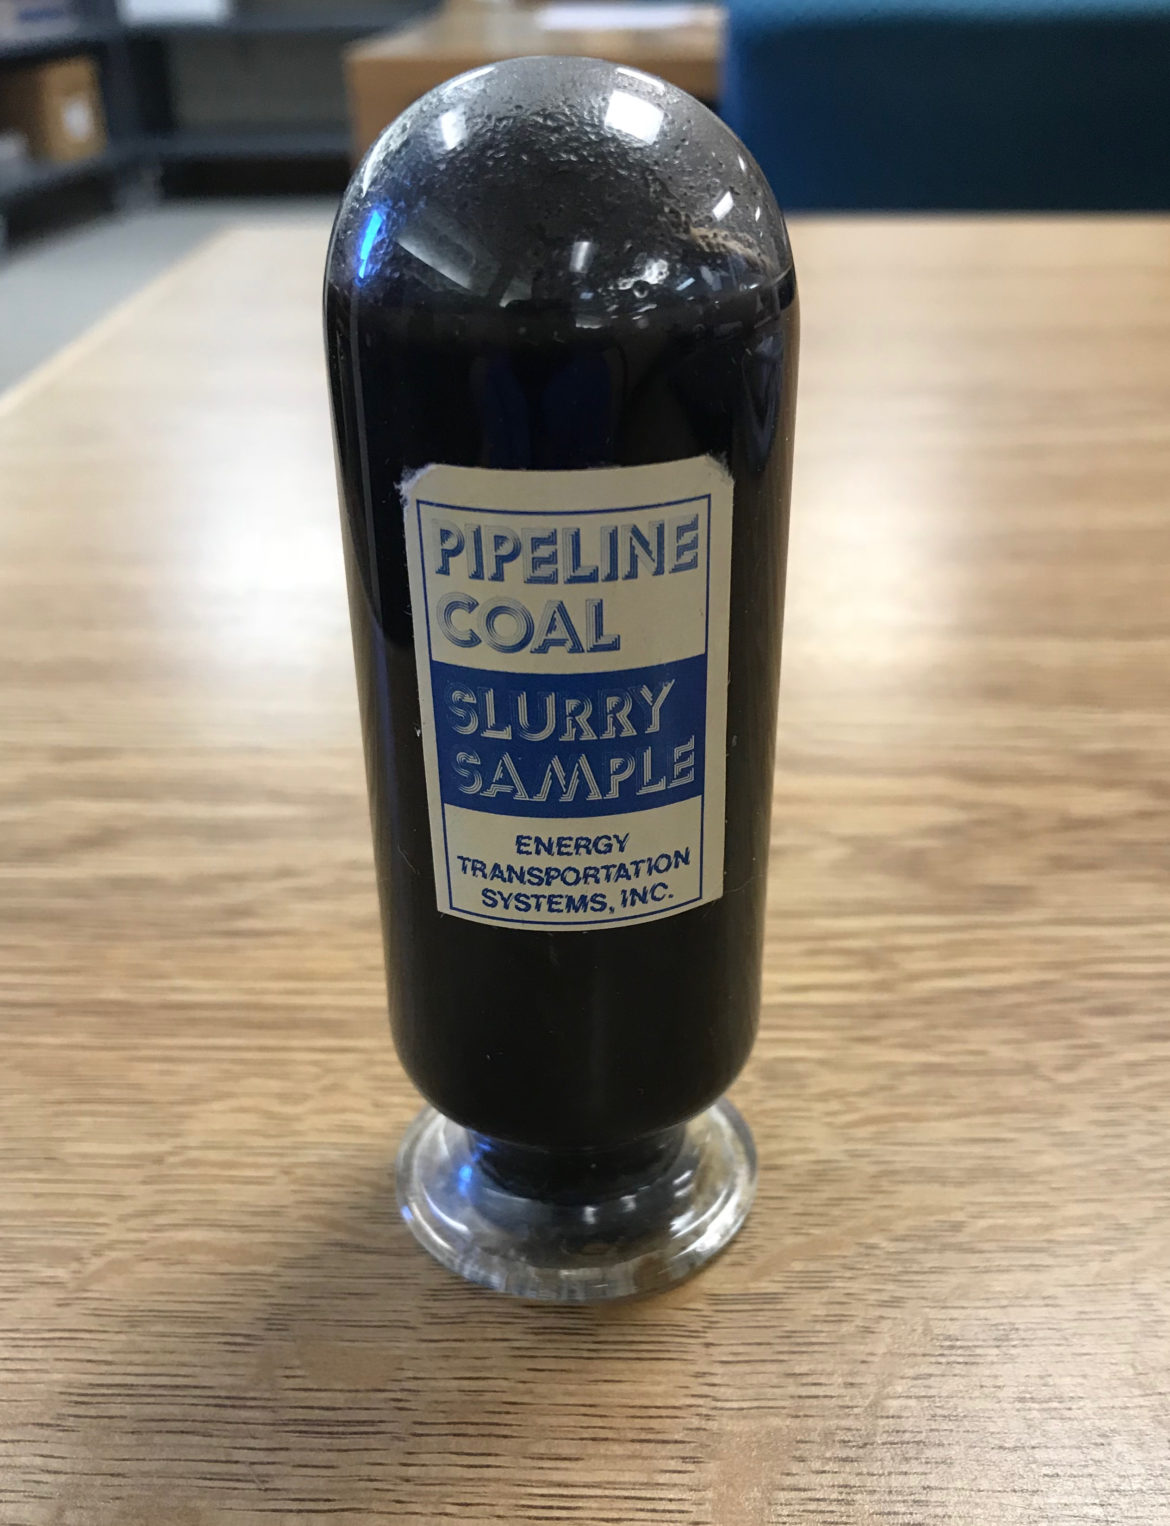 The bottle of coal slurry. The label reads, "Pipeline coal slurry sample, Energy Transportation Systems, Inc."